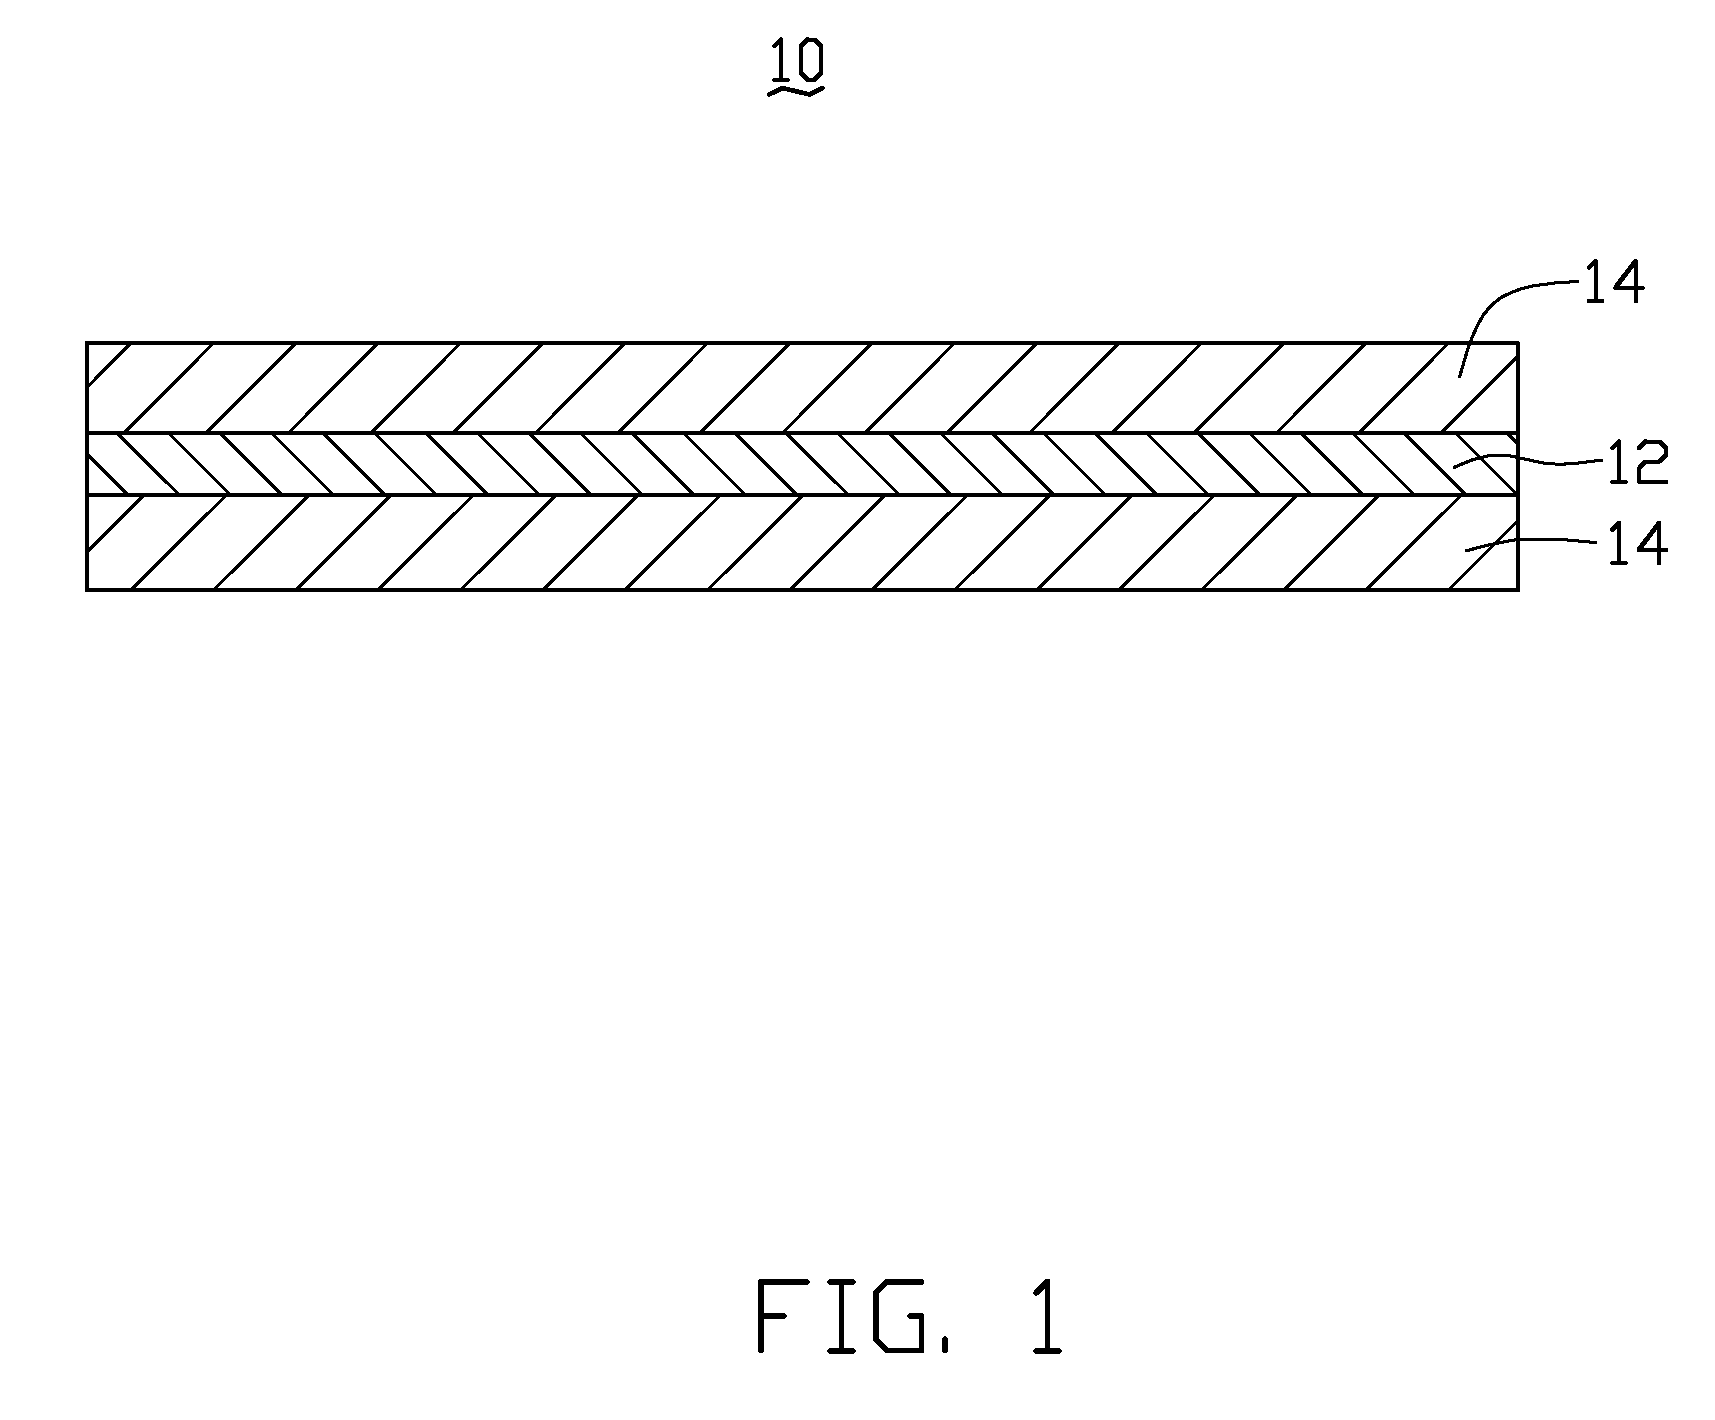 Carbon nanotube-based composite material and method for fabricating the same